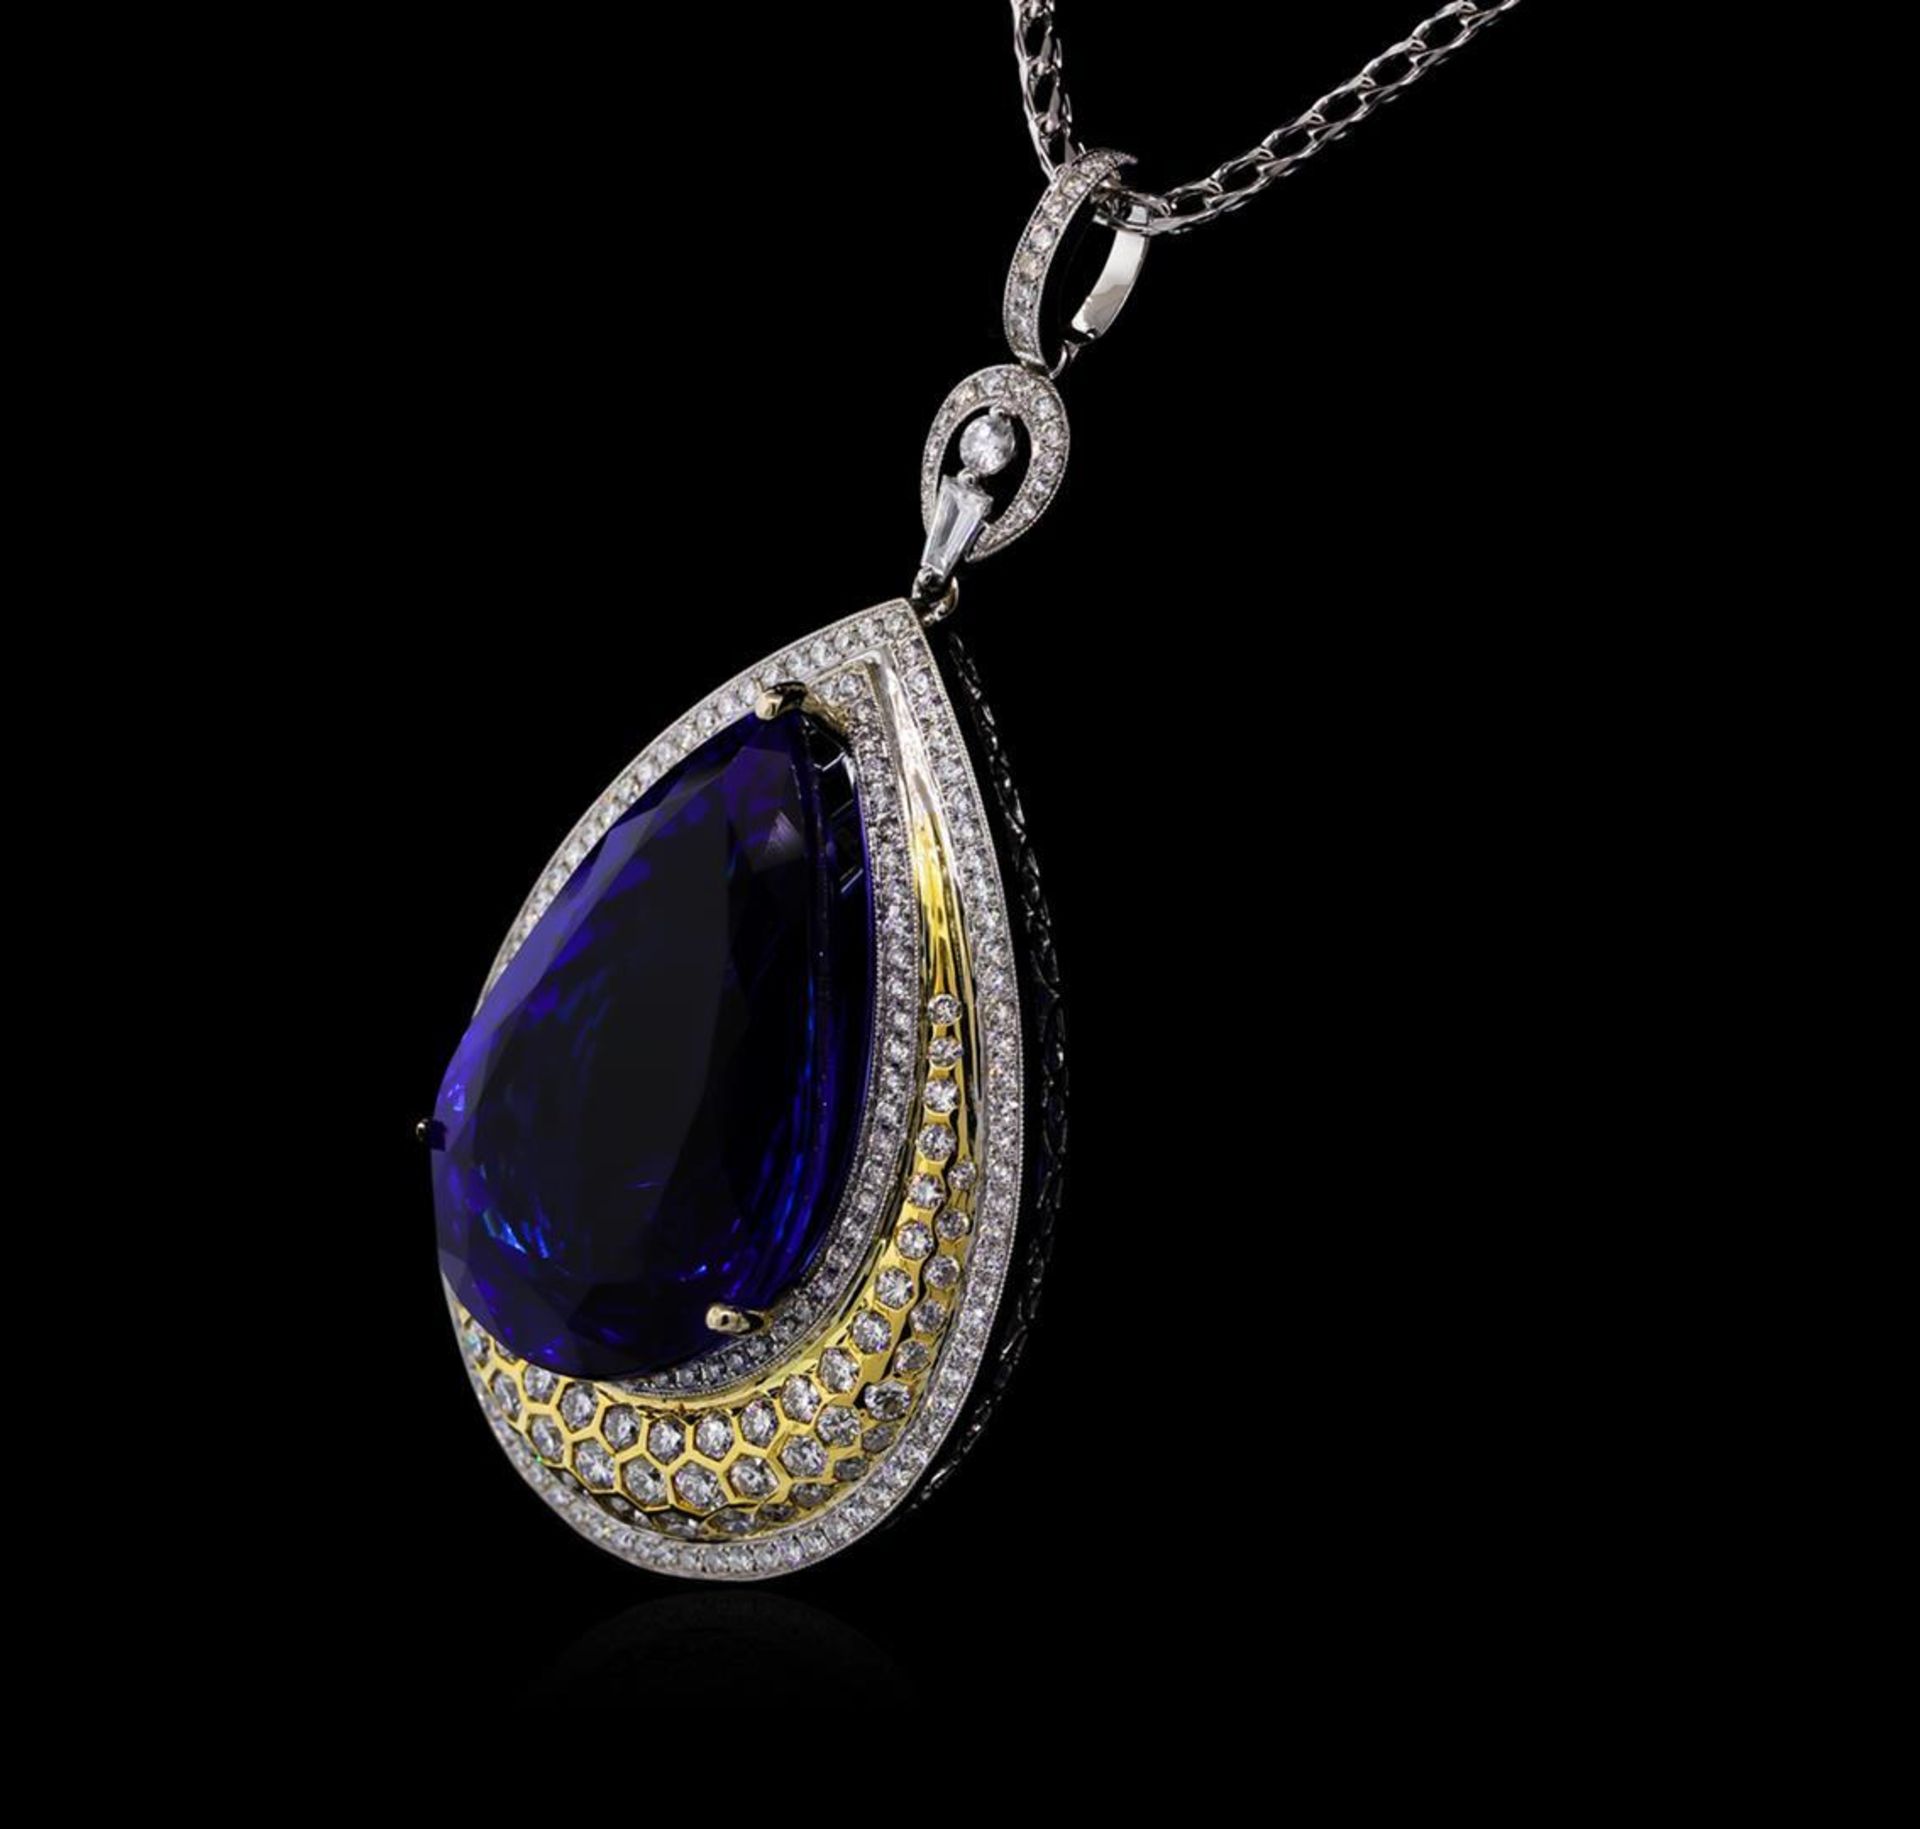 18KT White Gold GIA Certified 69.66 ctw Tanzanite and Diamond Pendant With Chain - Image 3 of 5